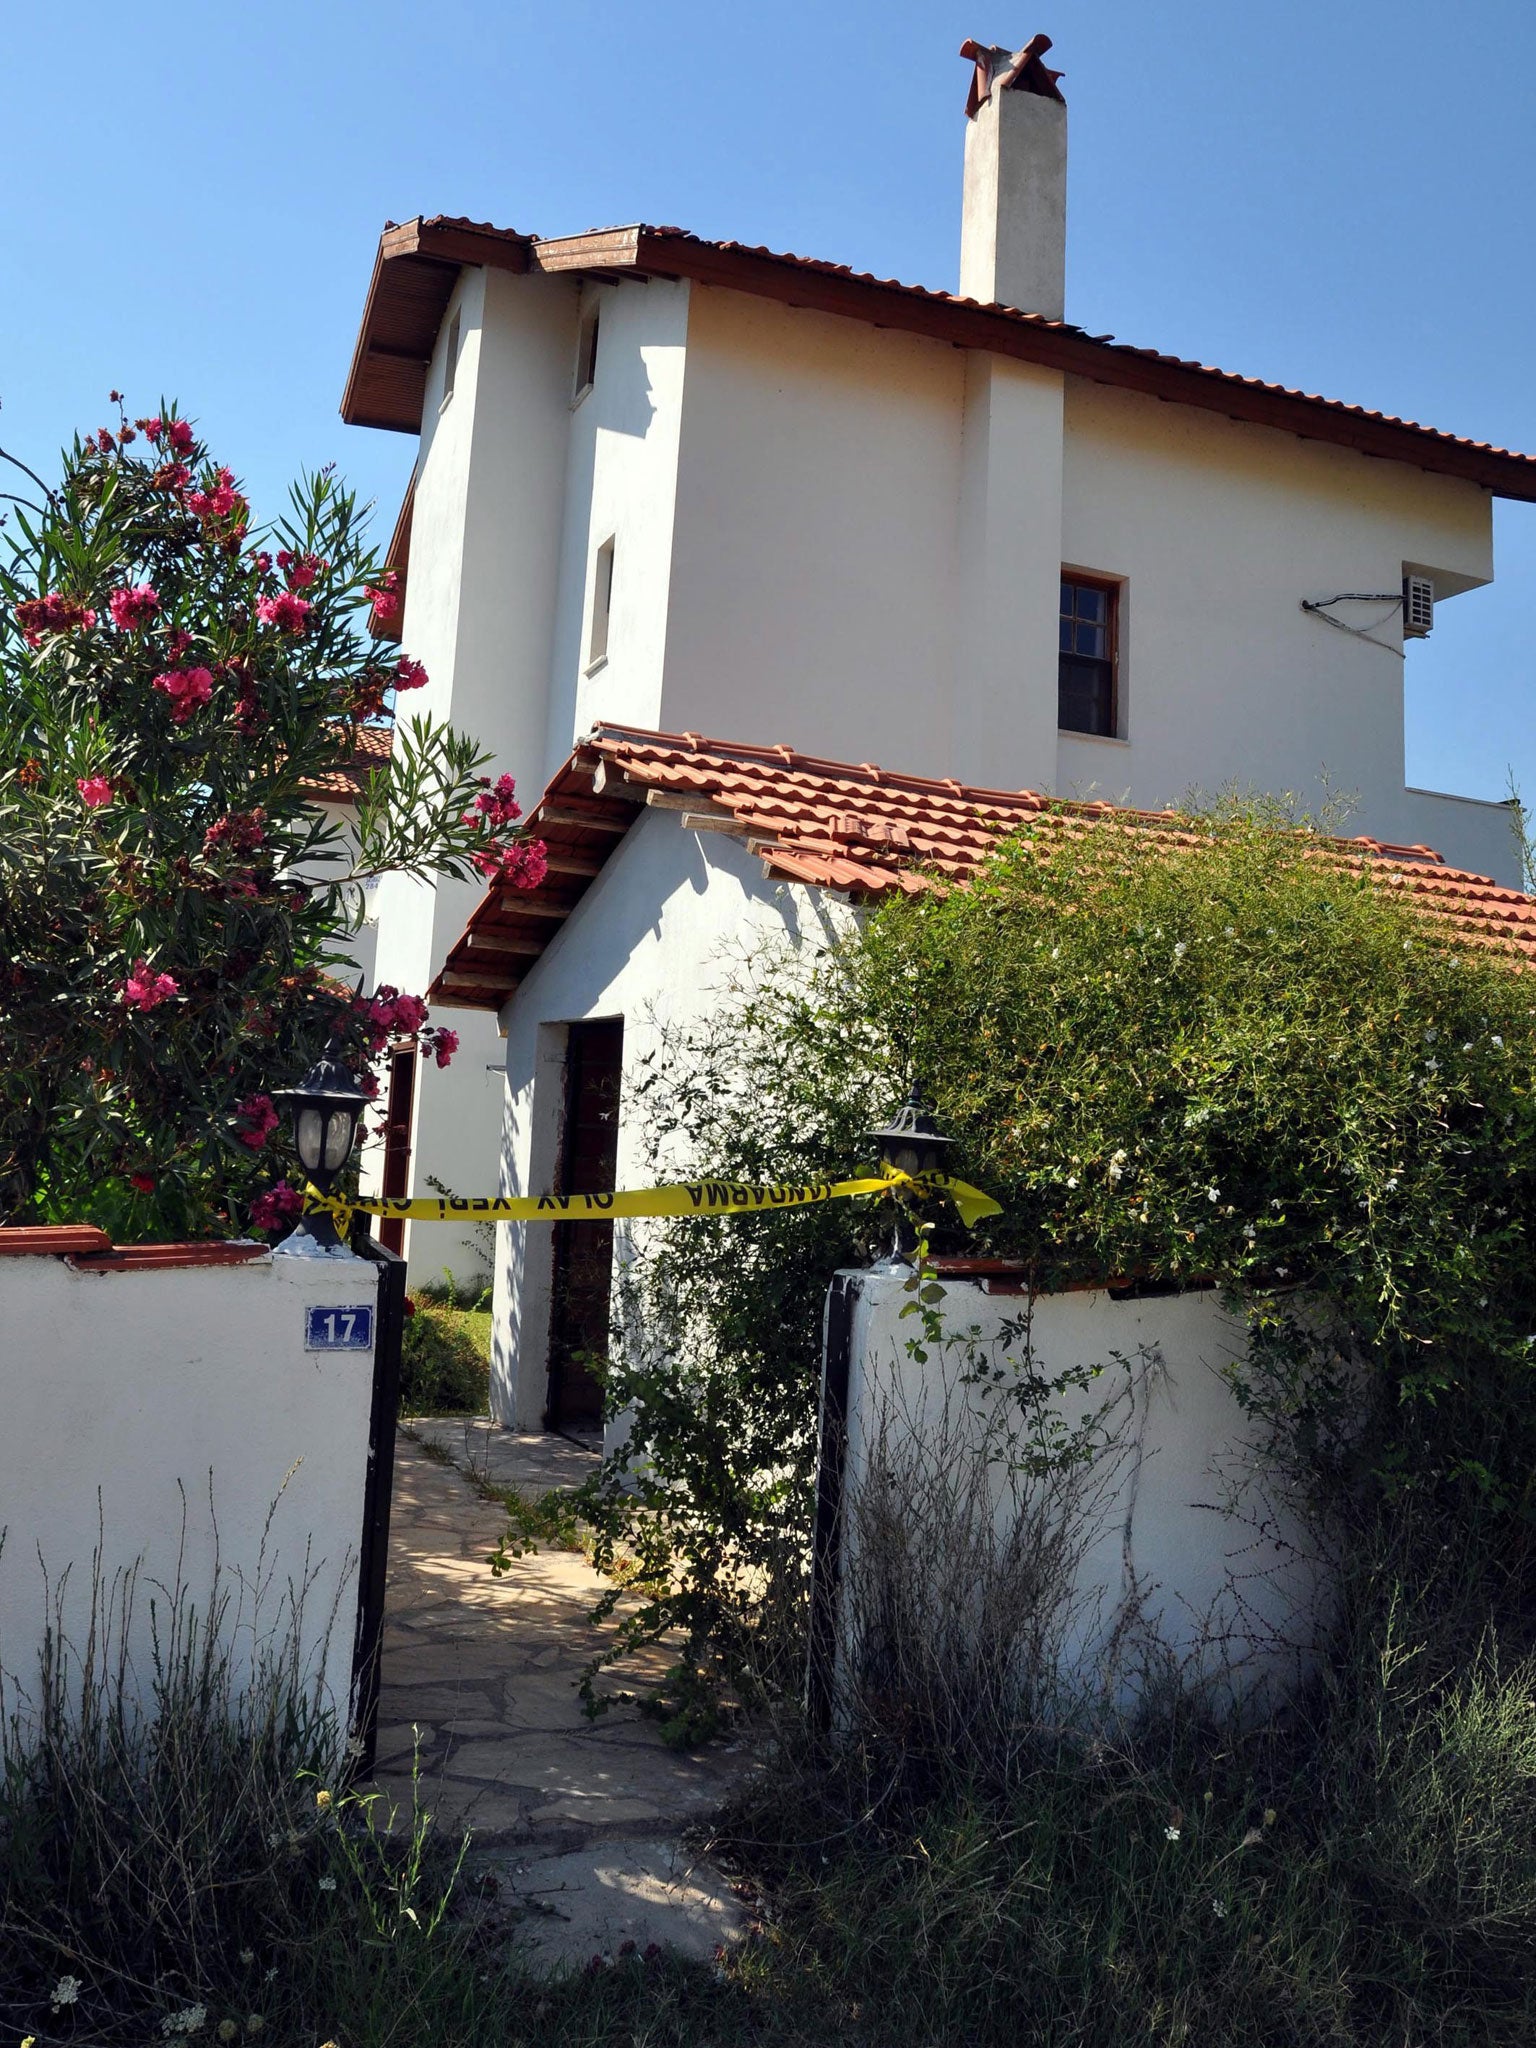 The villa in the resort of Dalyan, Turkey, where the shooting took place